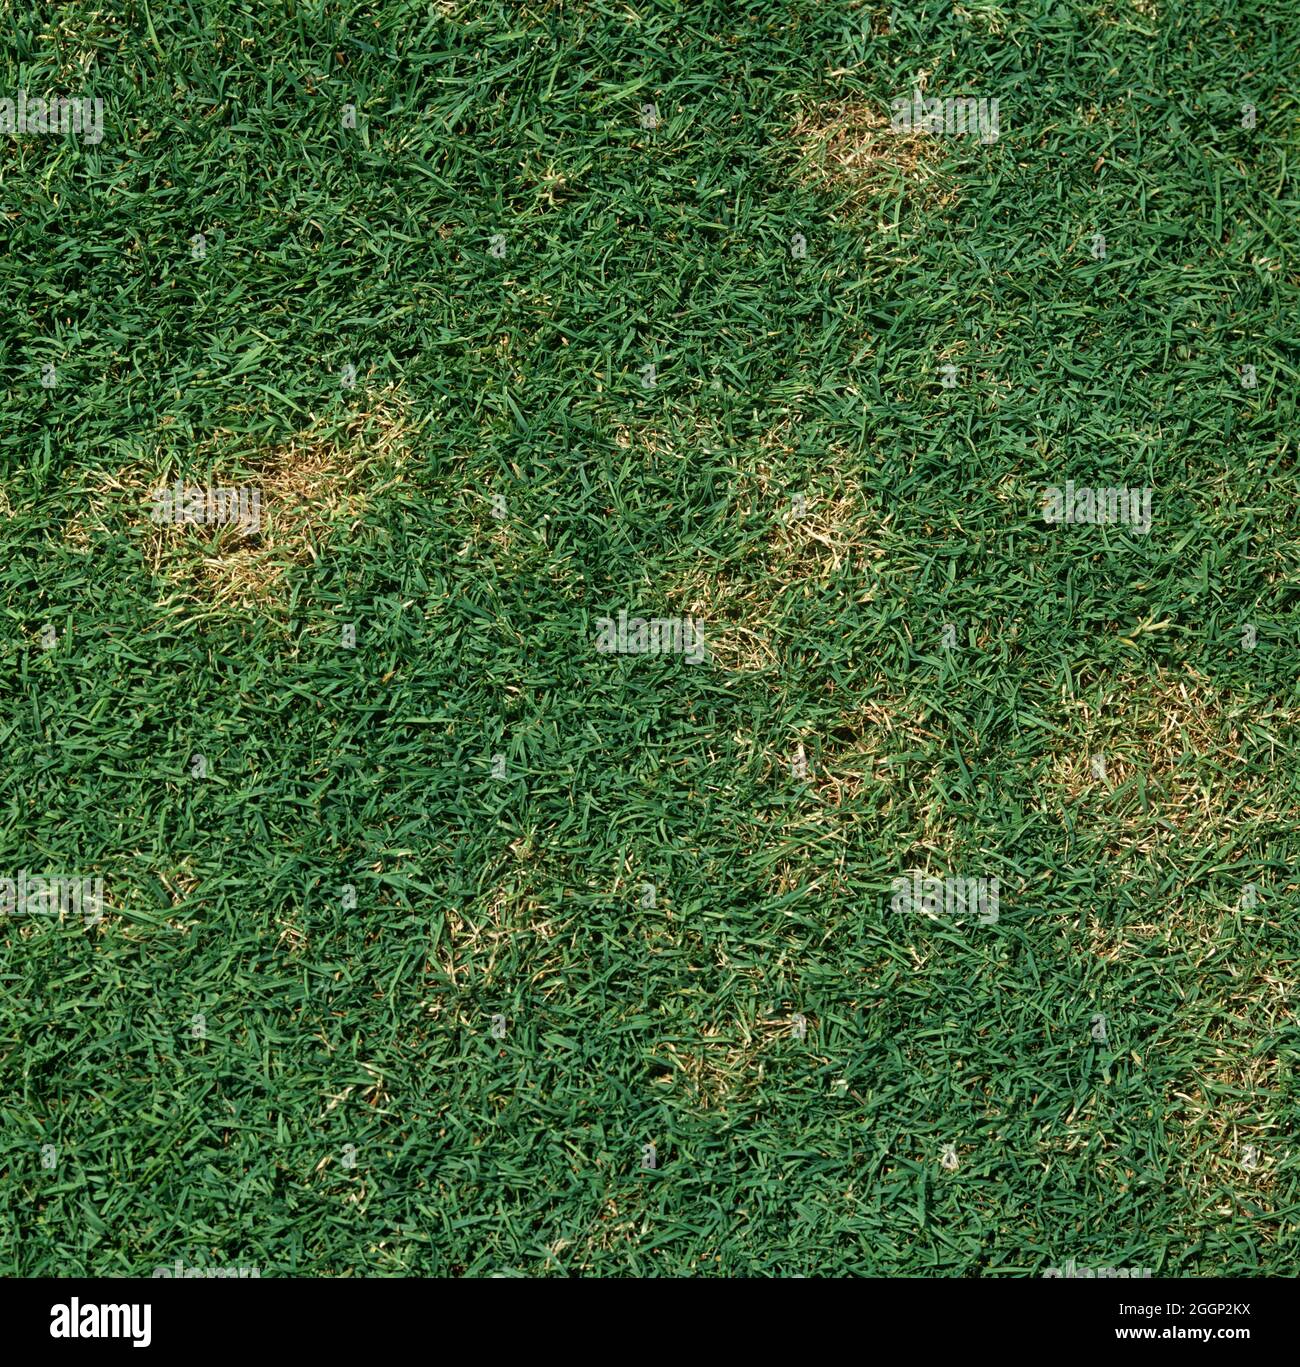 Light patches of grass infected with dollar spot (Clarireedia sp.) on golf course green, USA Stock Photo